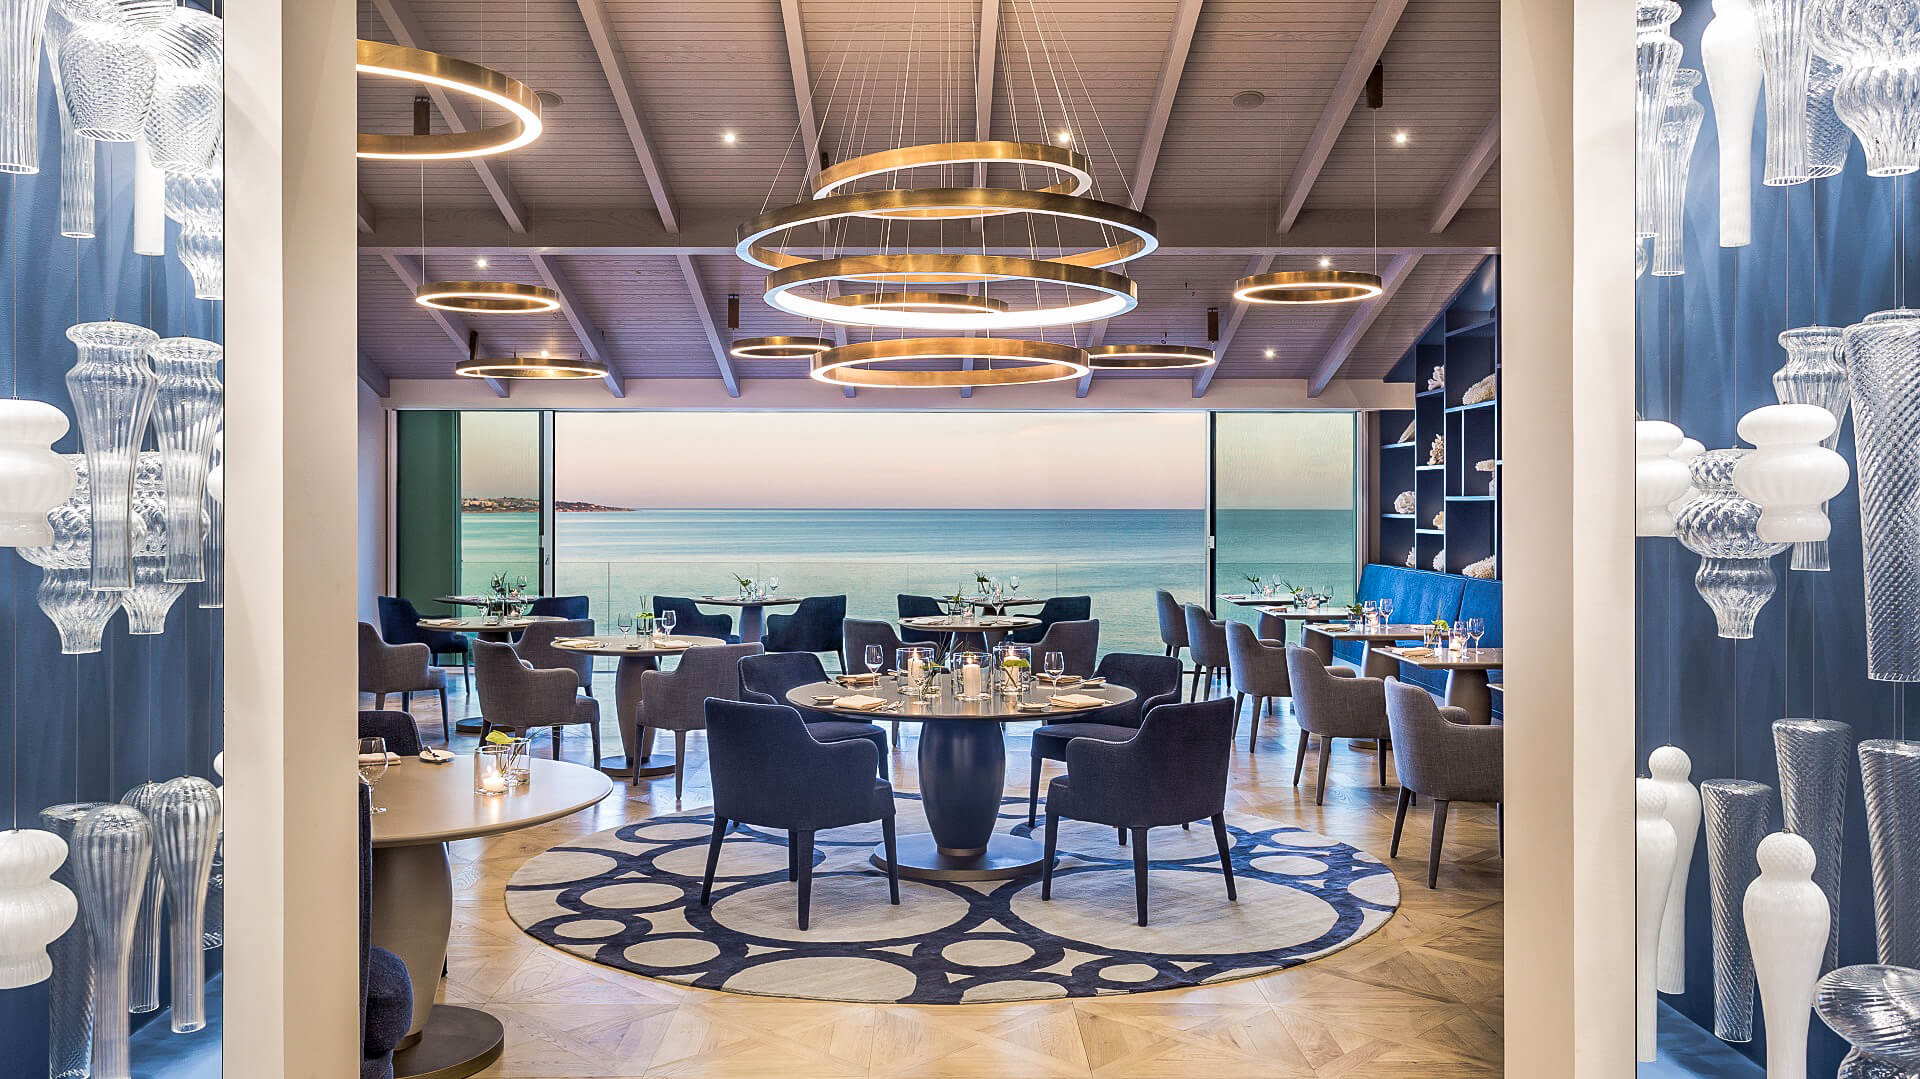 With its panoramic view over the Atlantic Ocean, the Ocean Restaurant is also an absolute visual highlight.